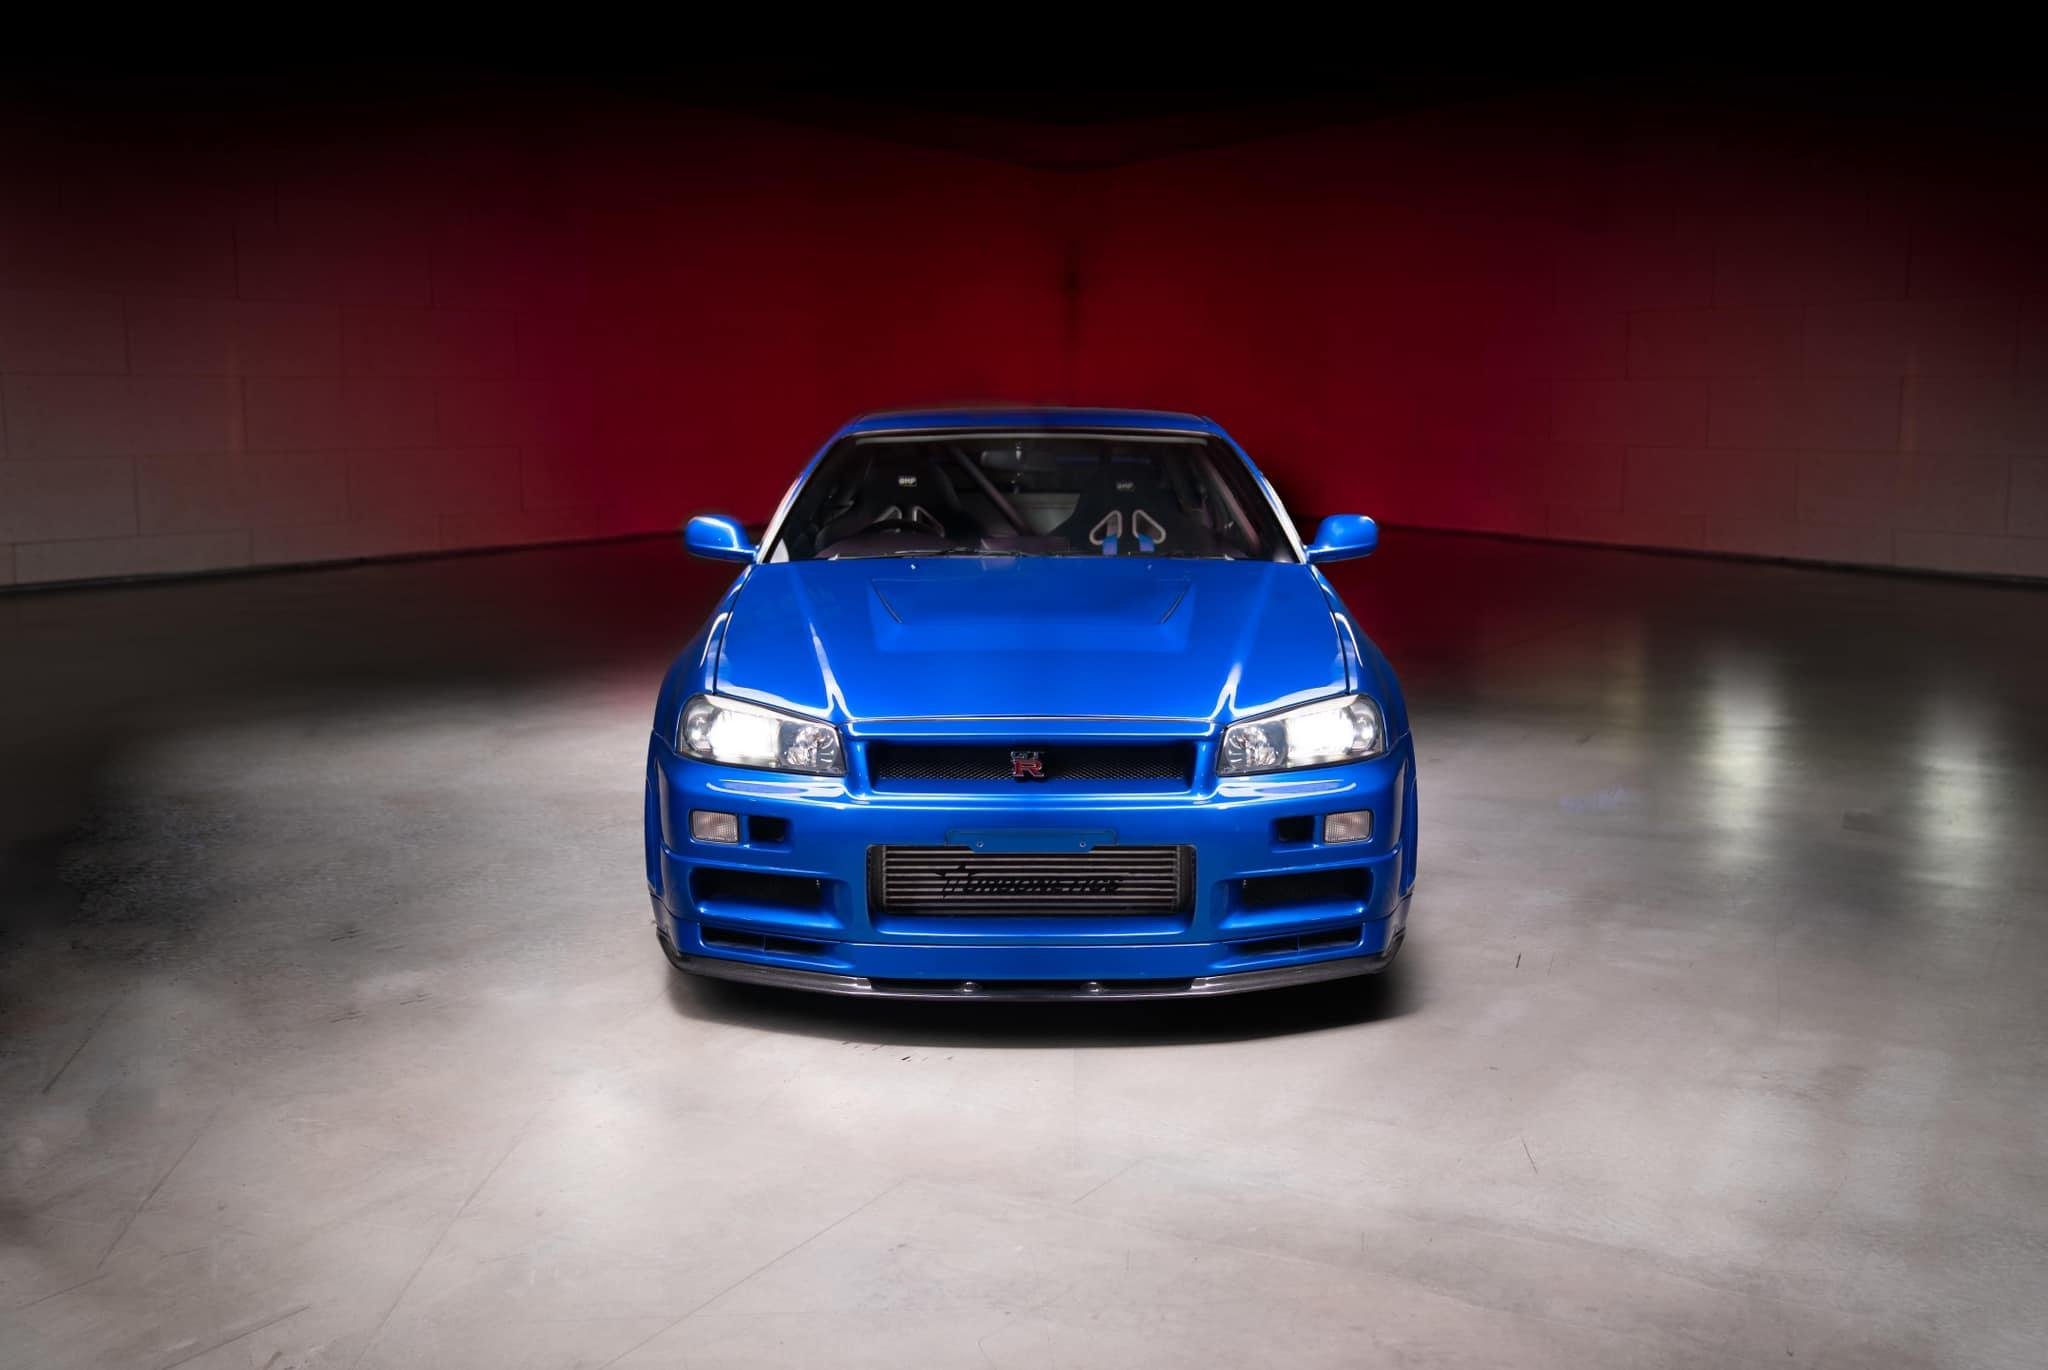 The Iconic Nissan Skyline From Fast And Furious Driven By The Late Paul Walker Is Hitting